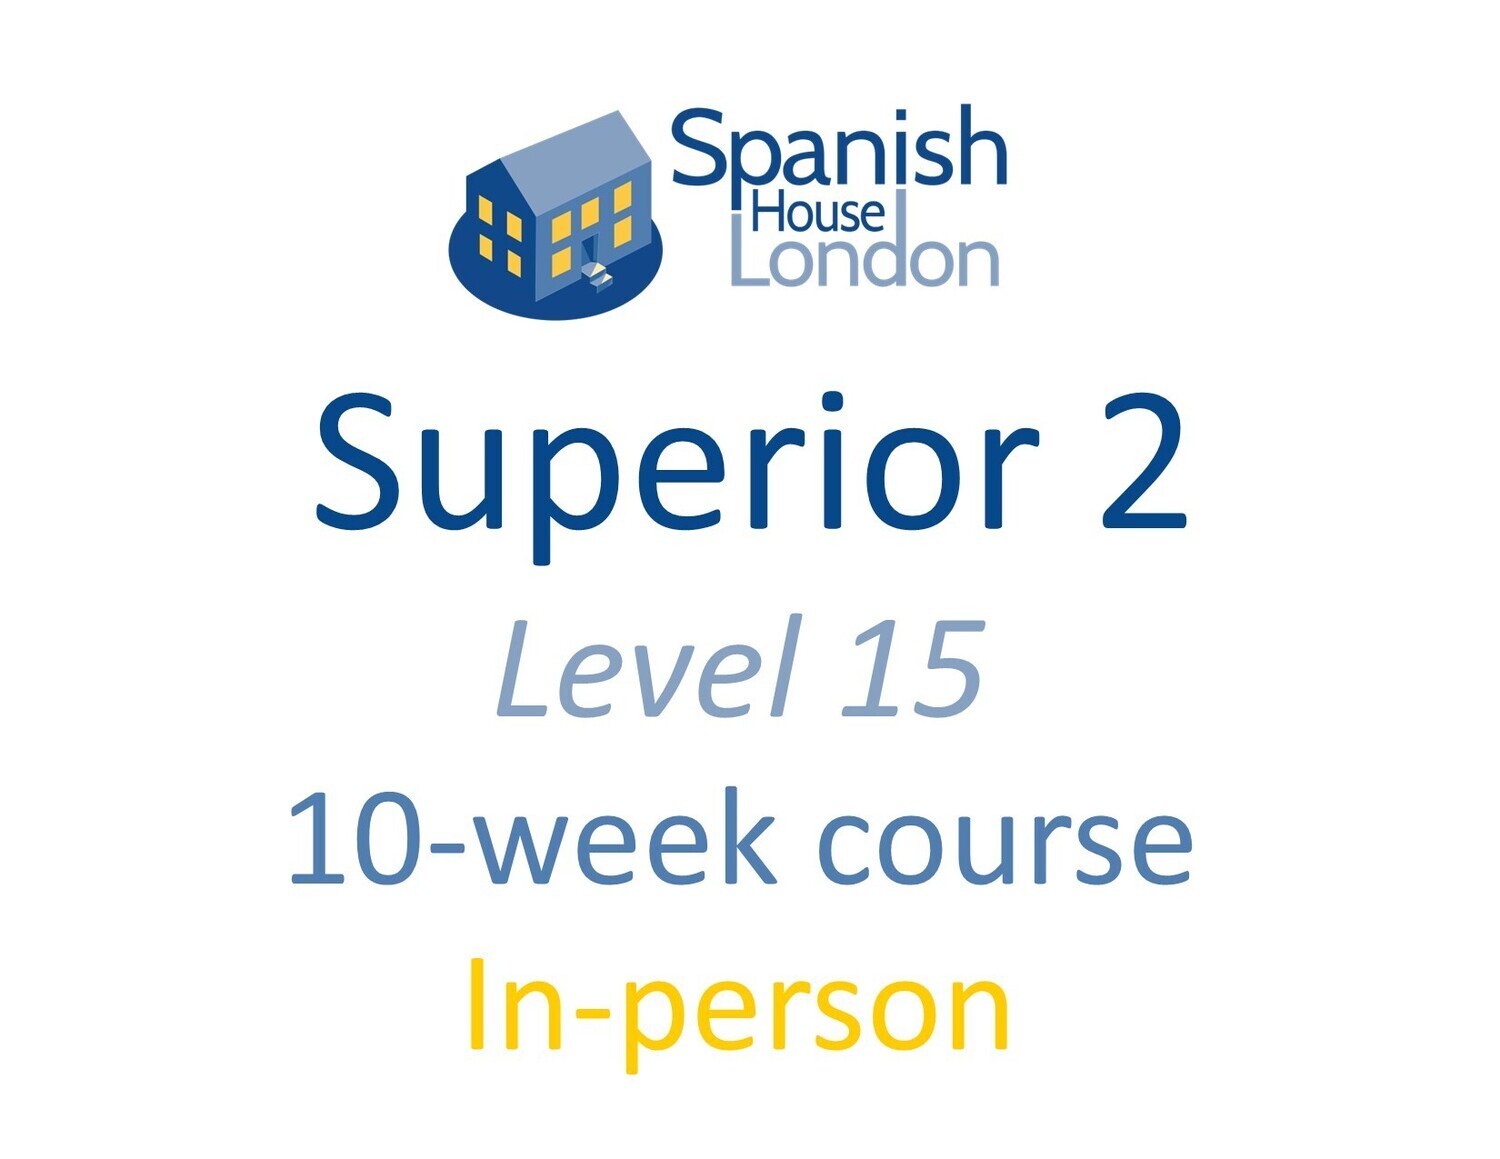 Superior 2 Course starting on 27th January at 6pm in Clapham North